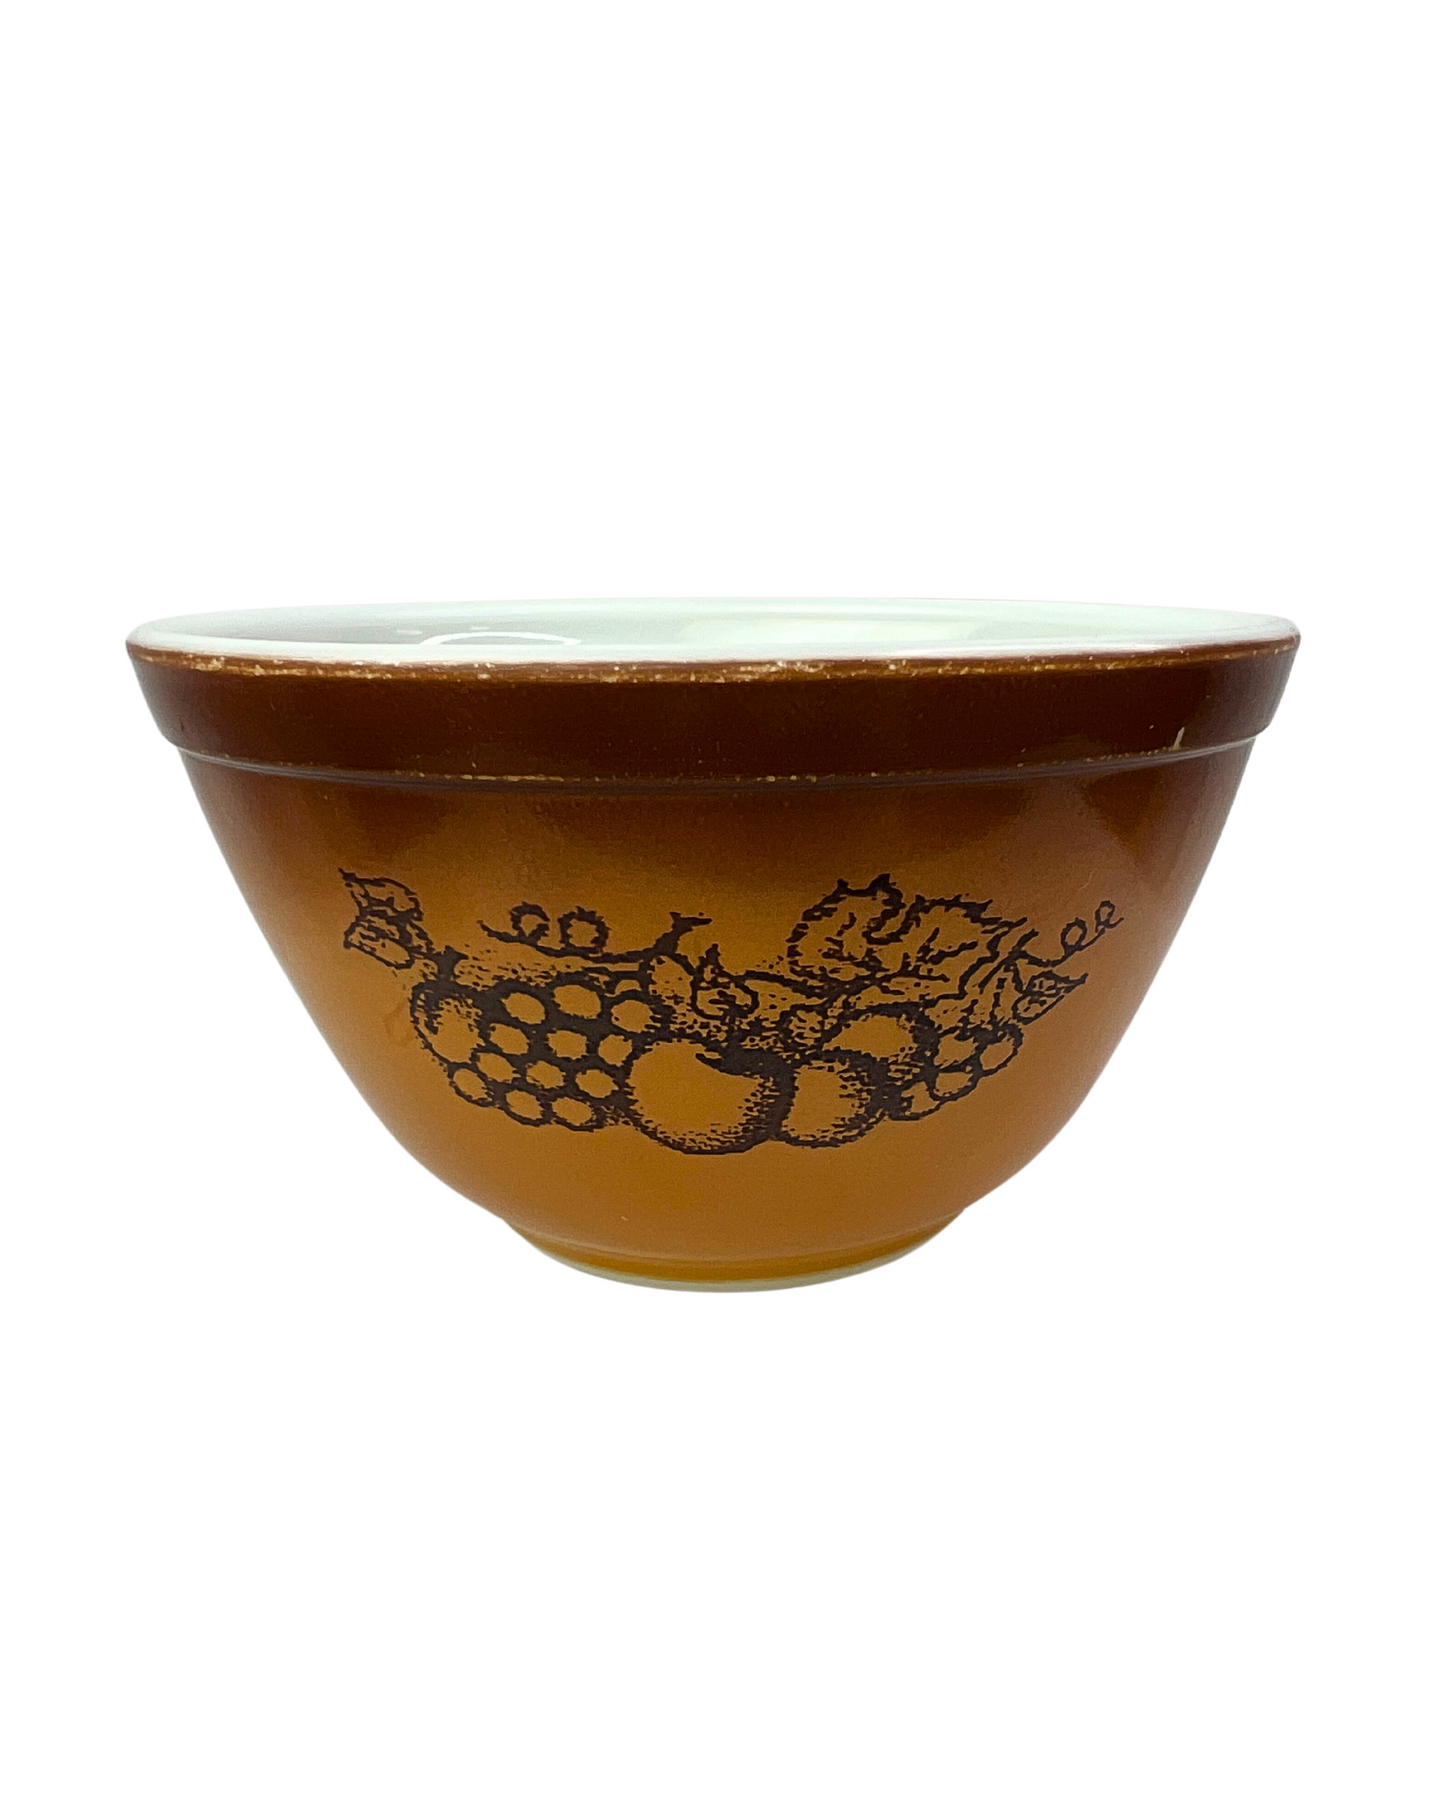 80’s PYREX Old Orchid 401 1.5 PT Mixing Bowl